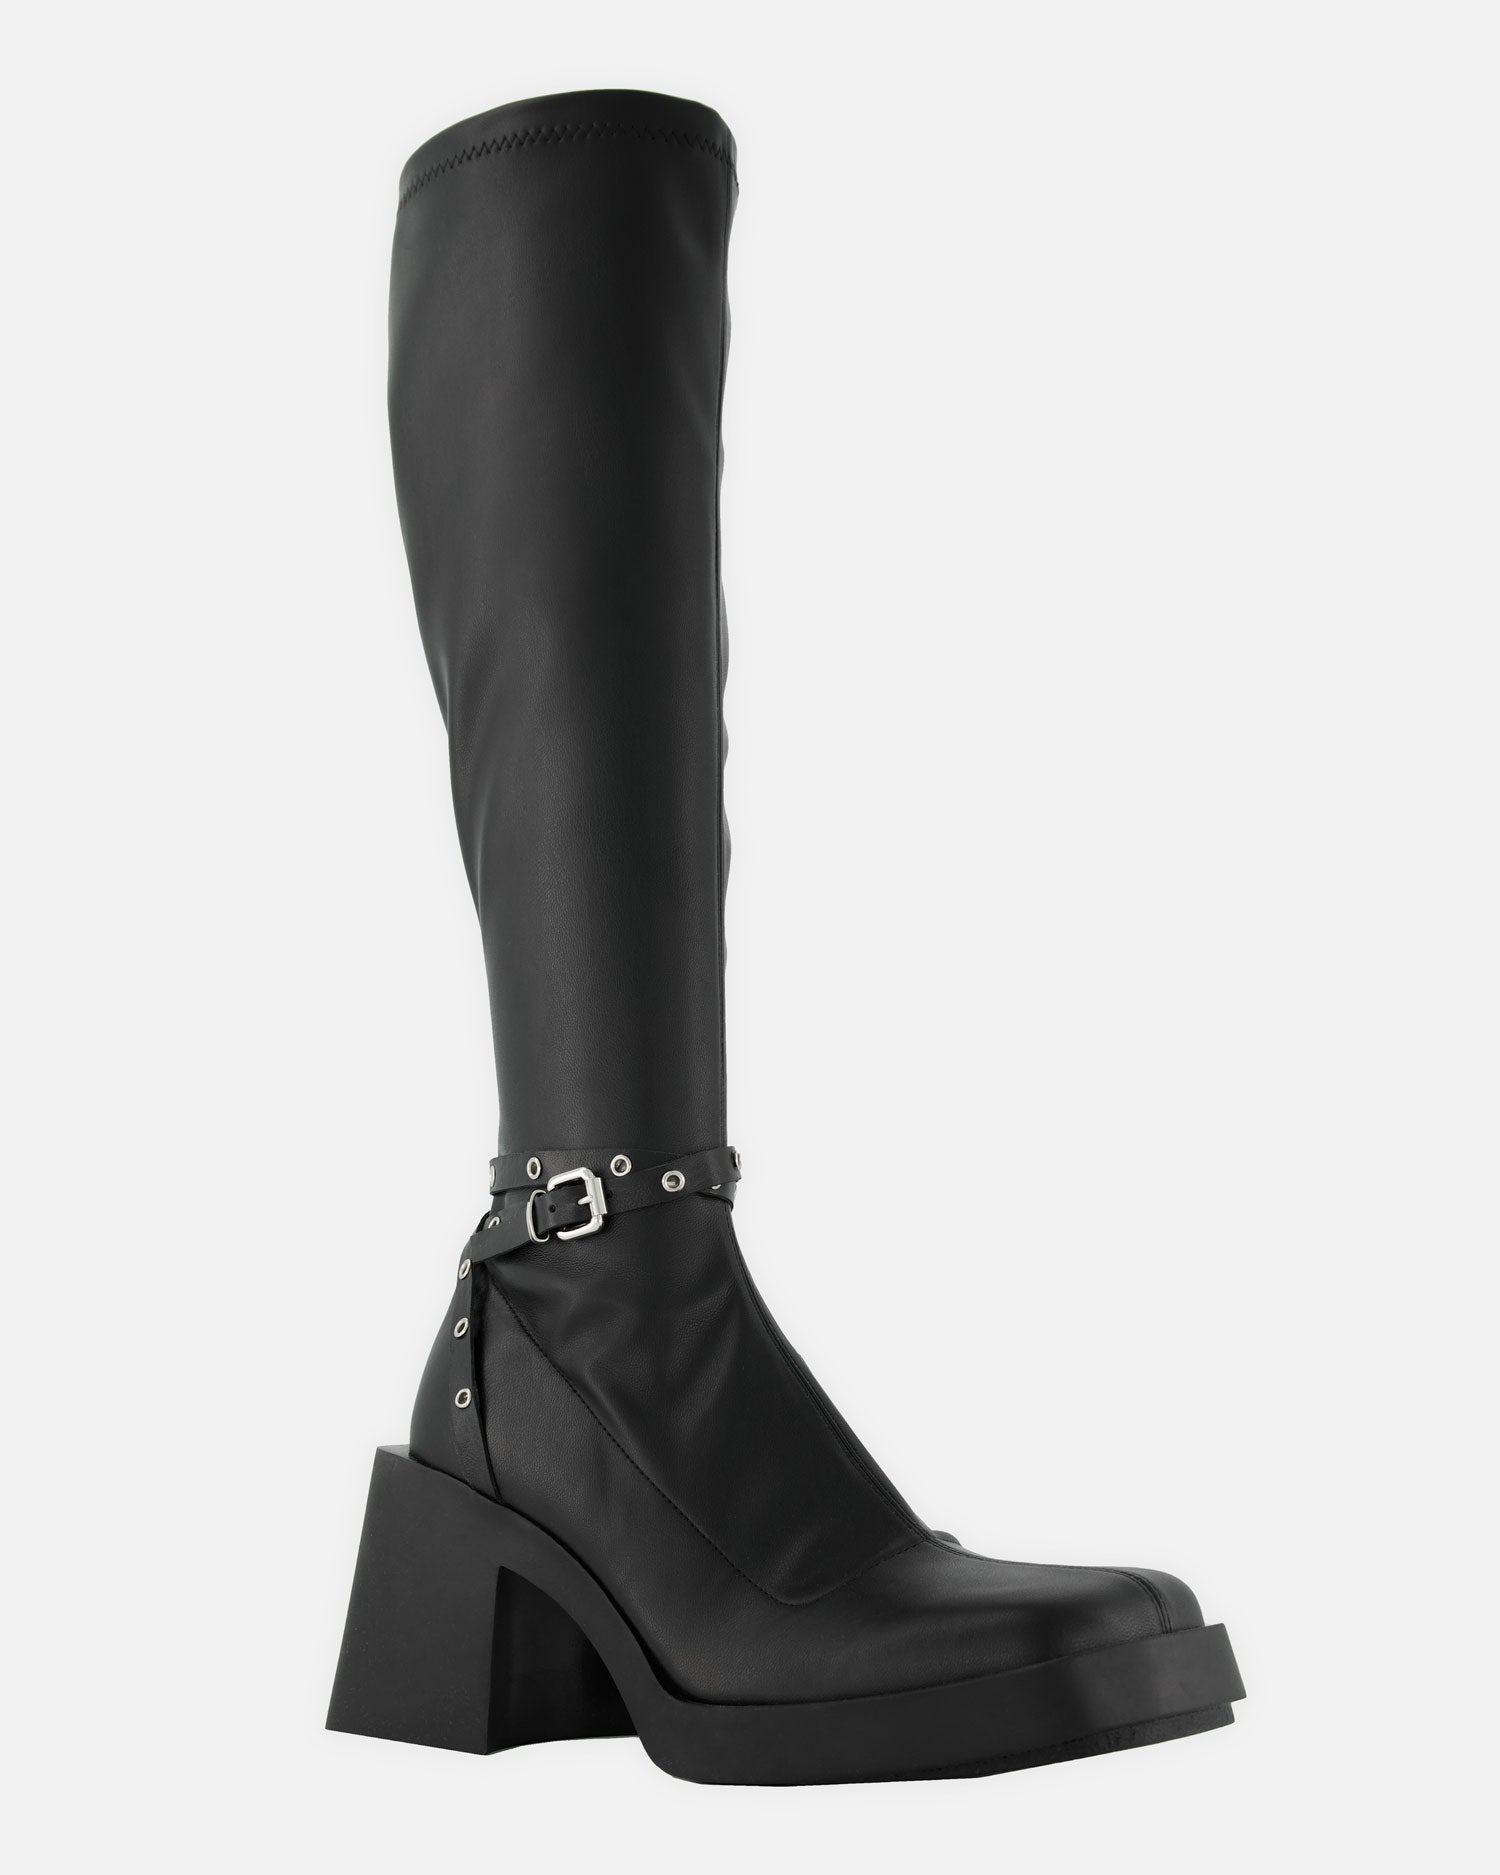 Chloe Strapped High Boots - Boots - Justine Clenquet - Elevastor